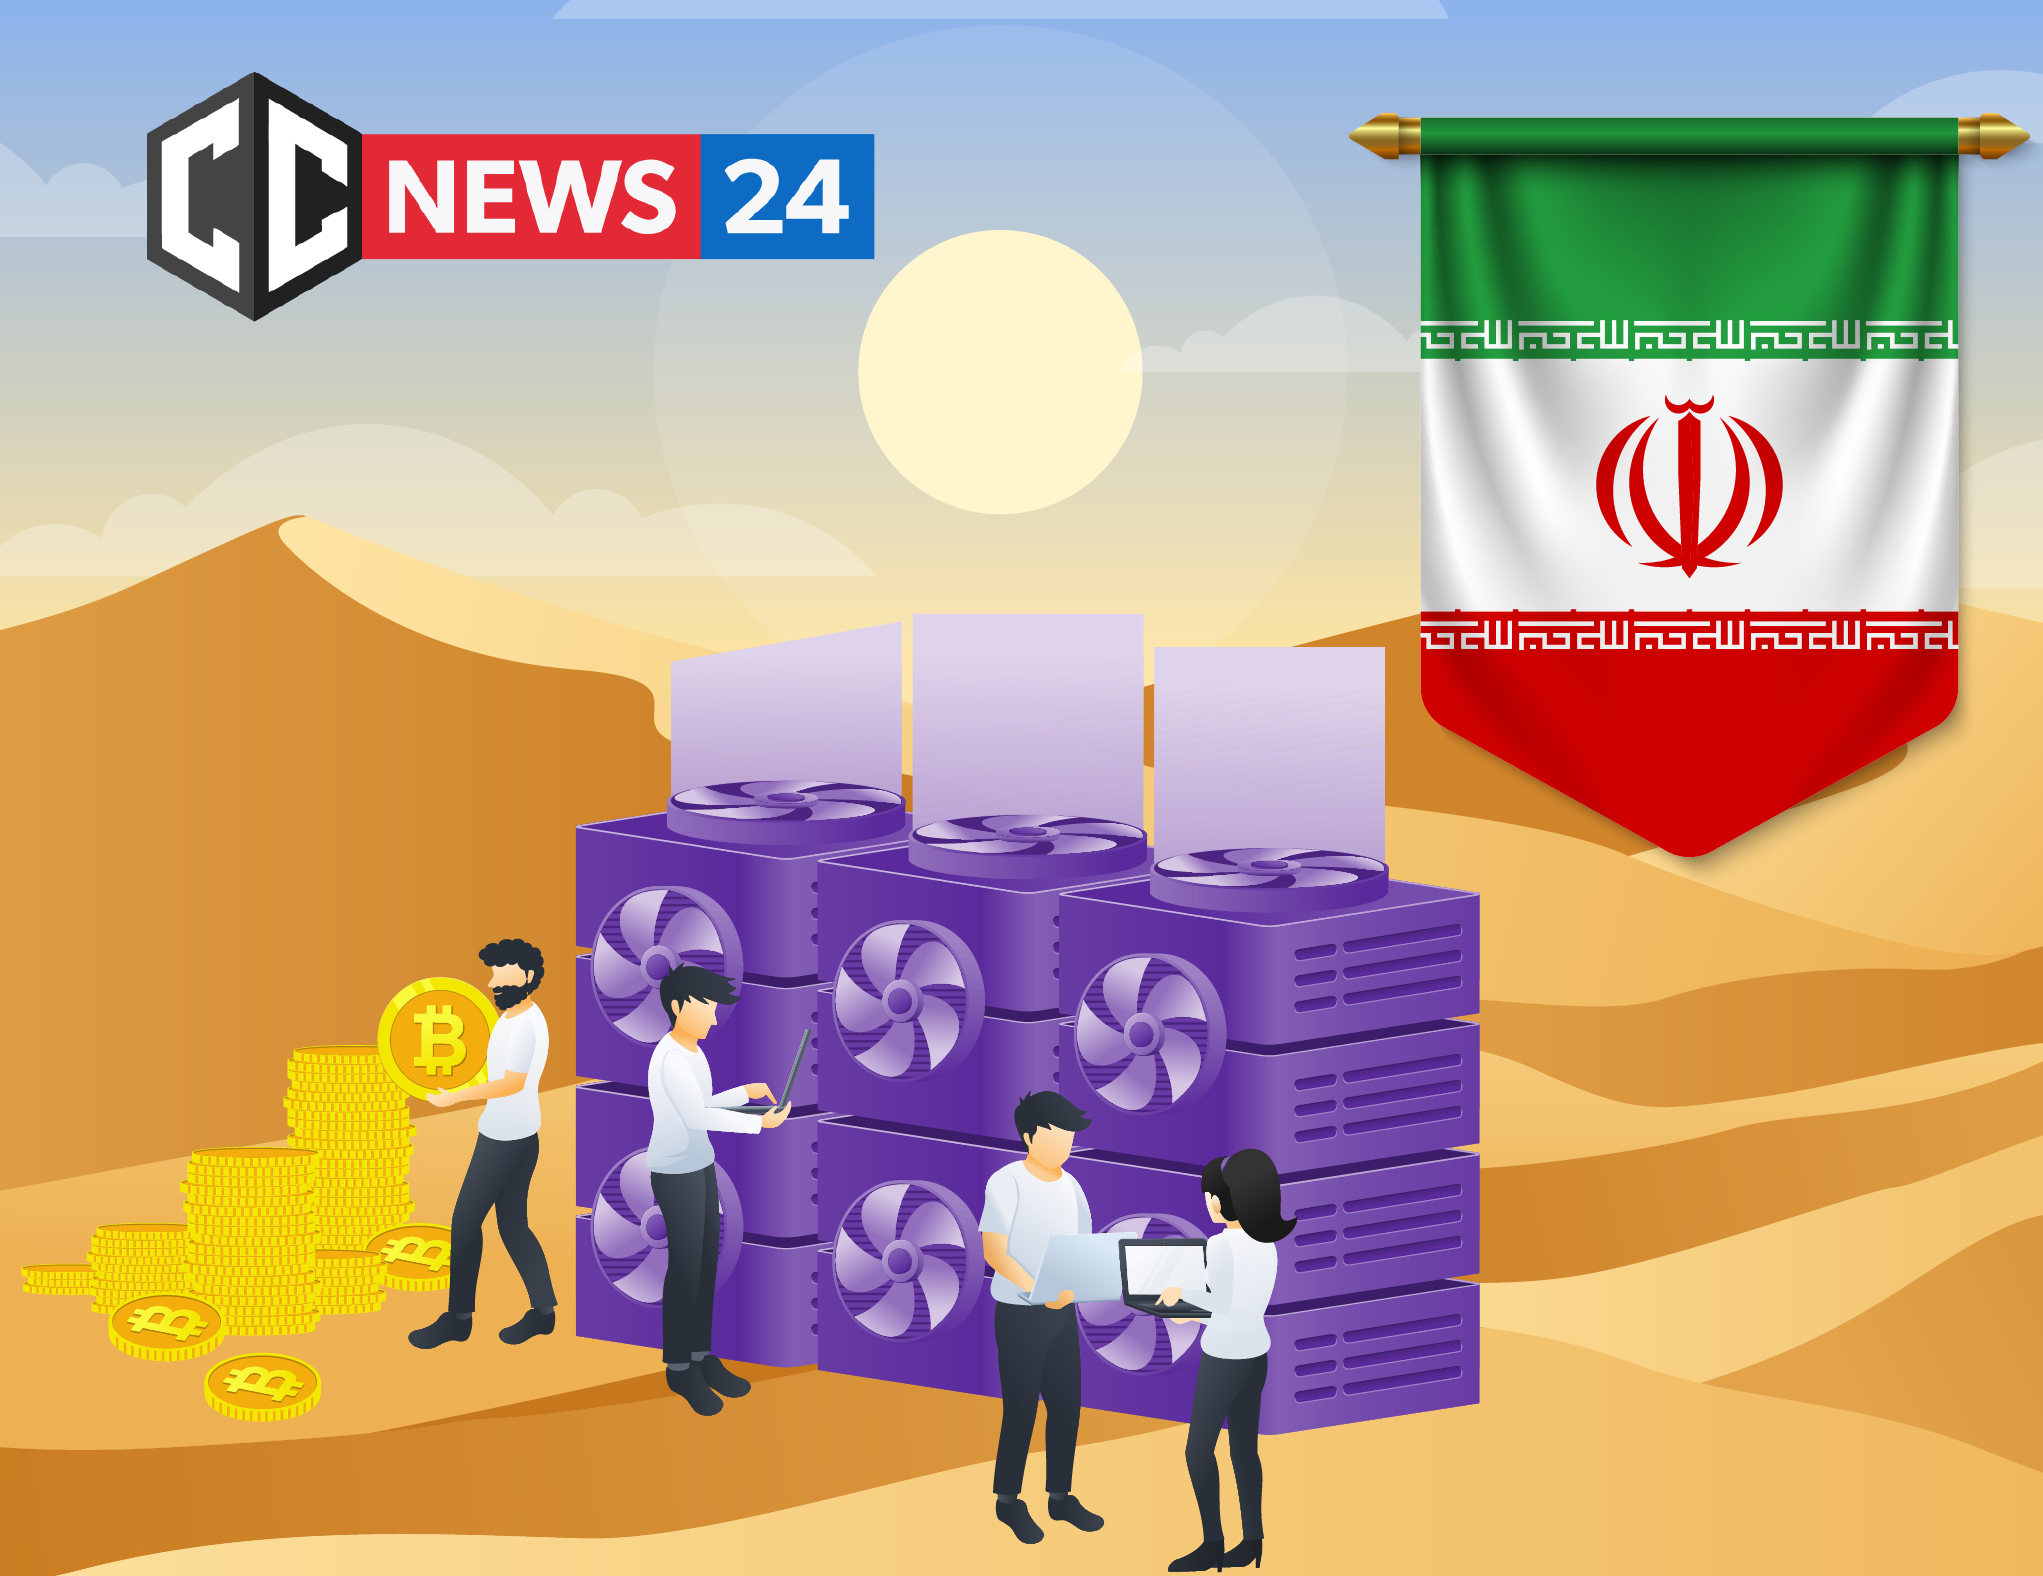 Iran has licensed for the first time a BTC mining farm with 6,000 machines